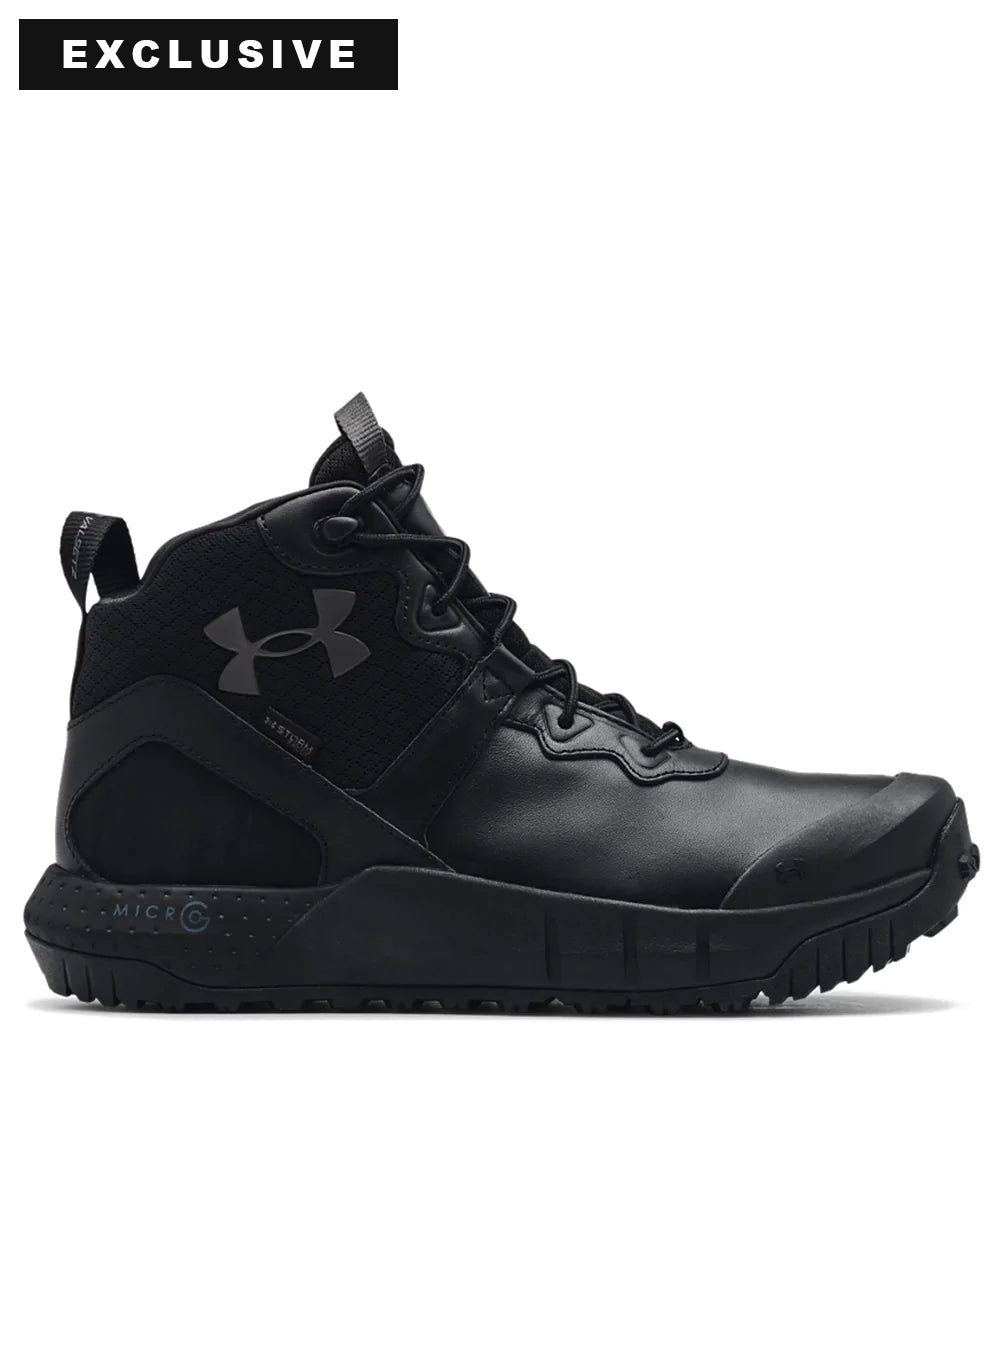 Under Armour Micro G Valsetz Mid Leather Waterproof Boots